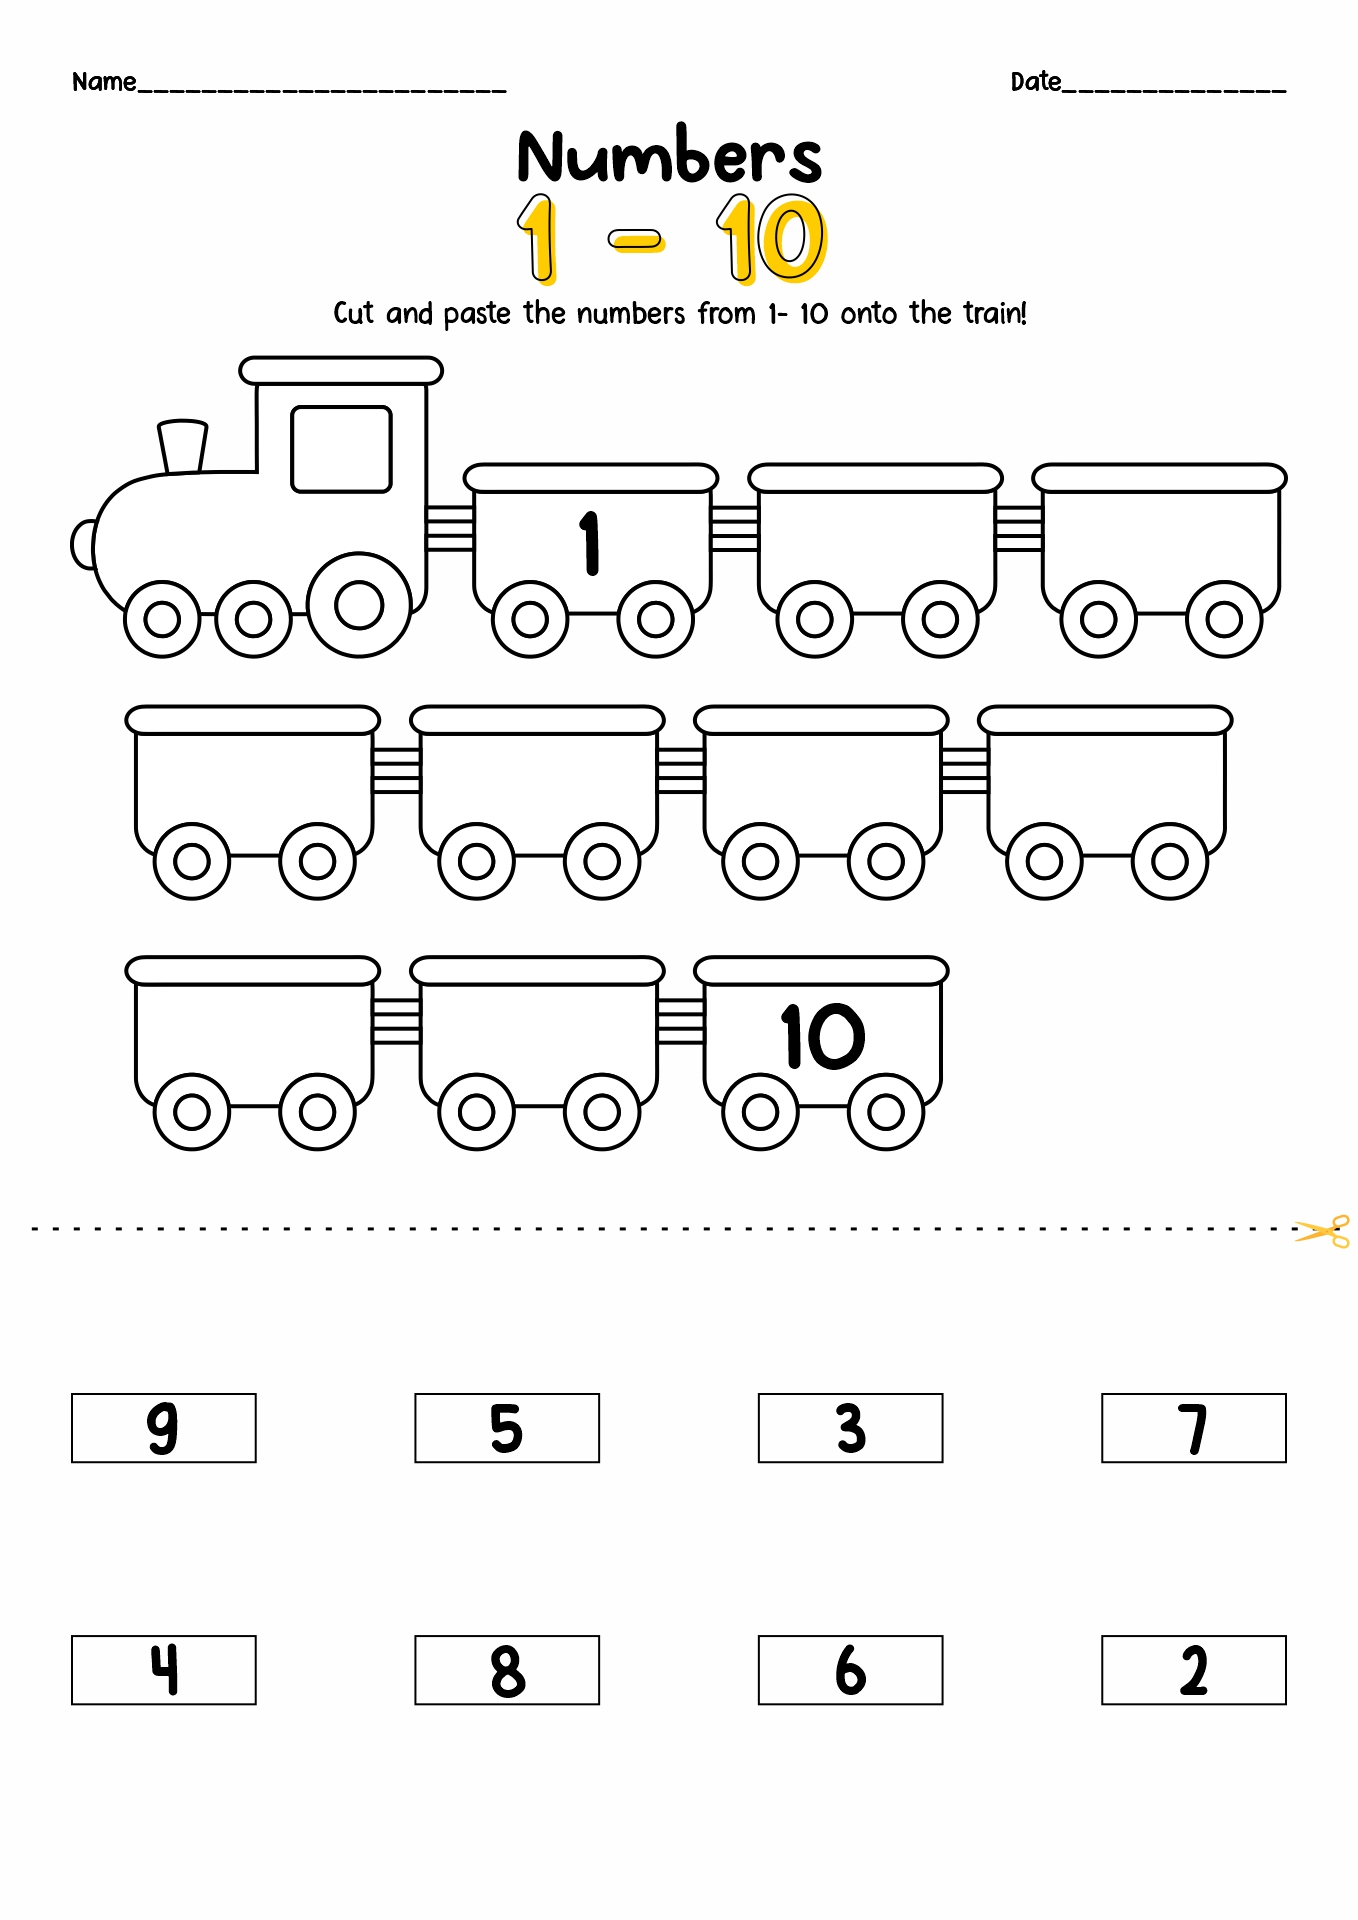 Cut and Paste Number Worksheets Image